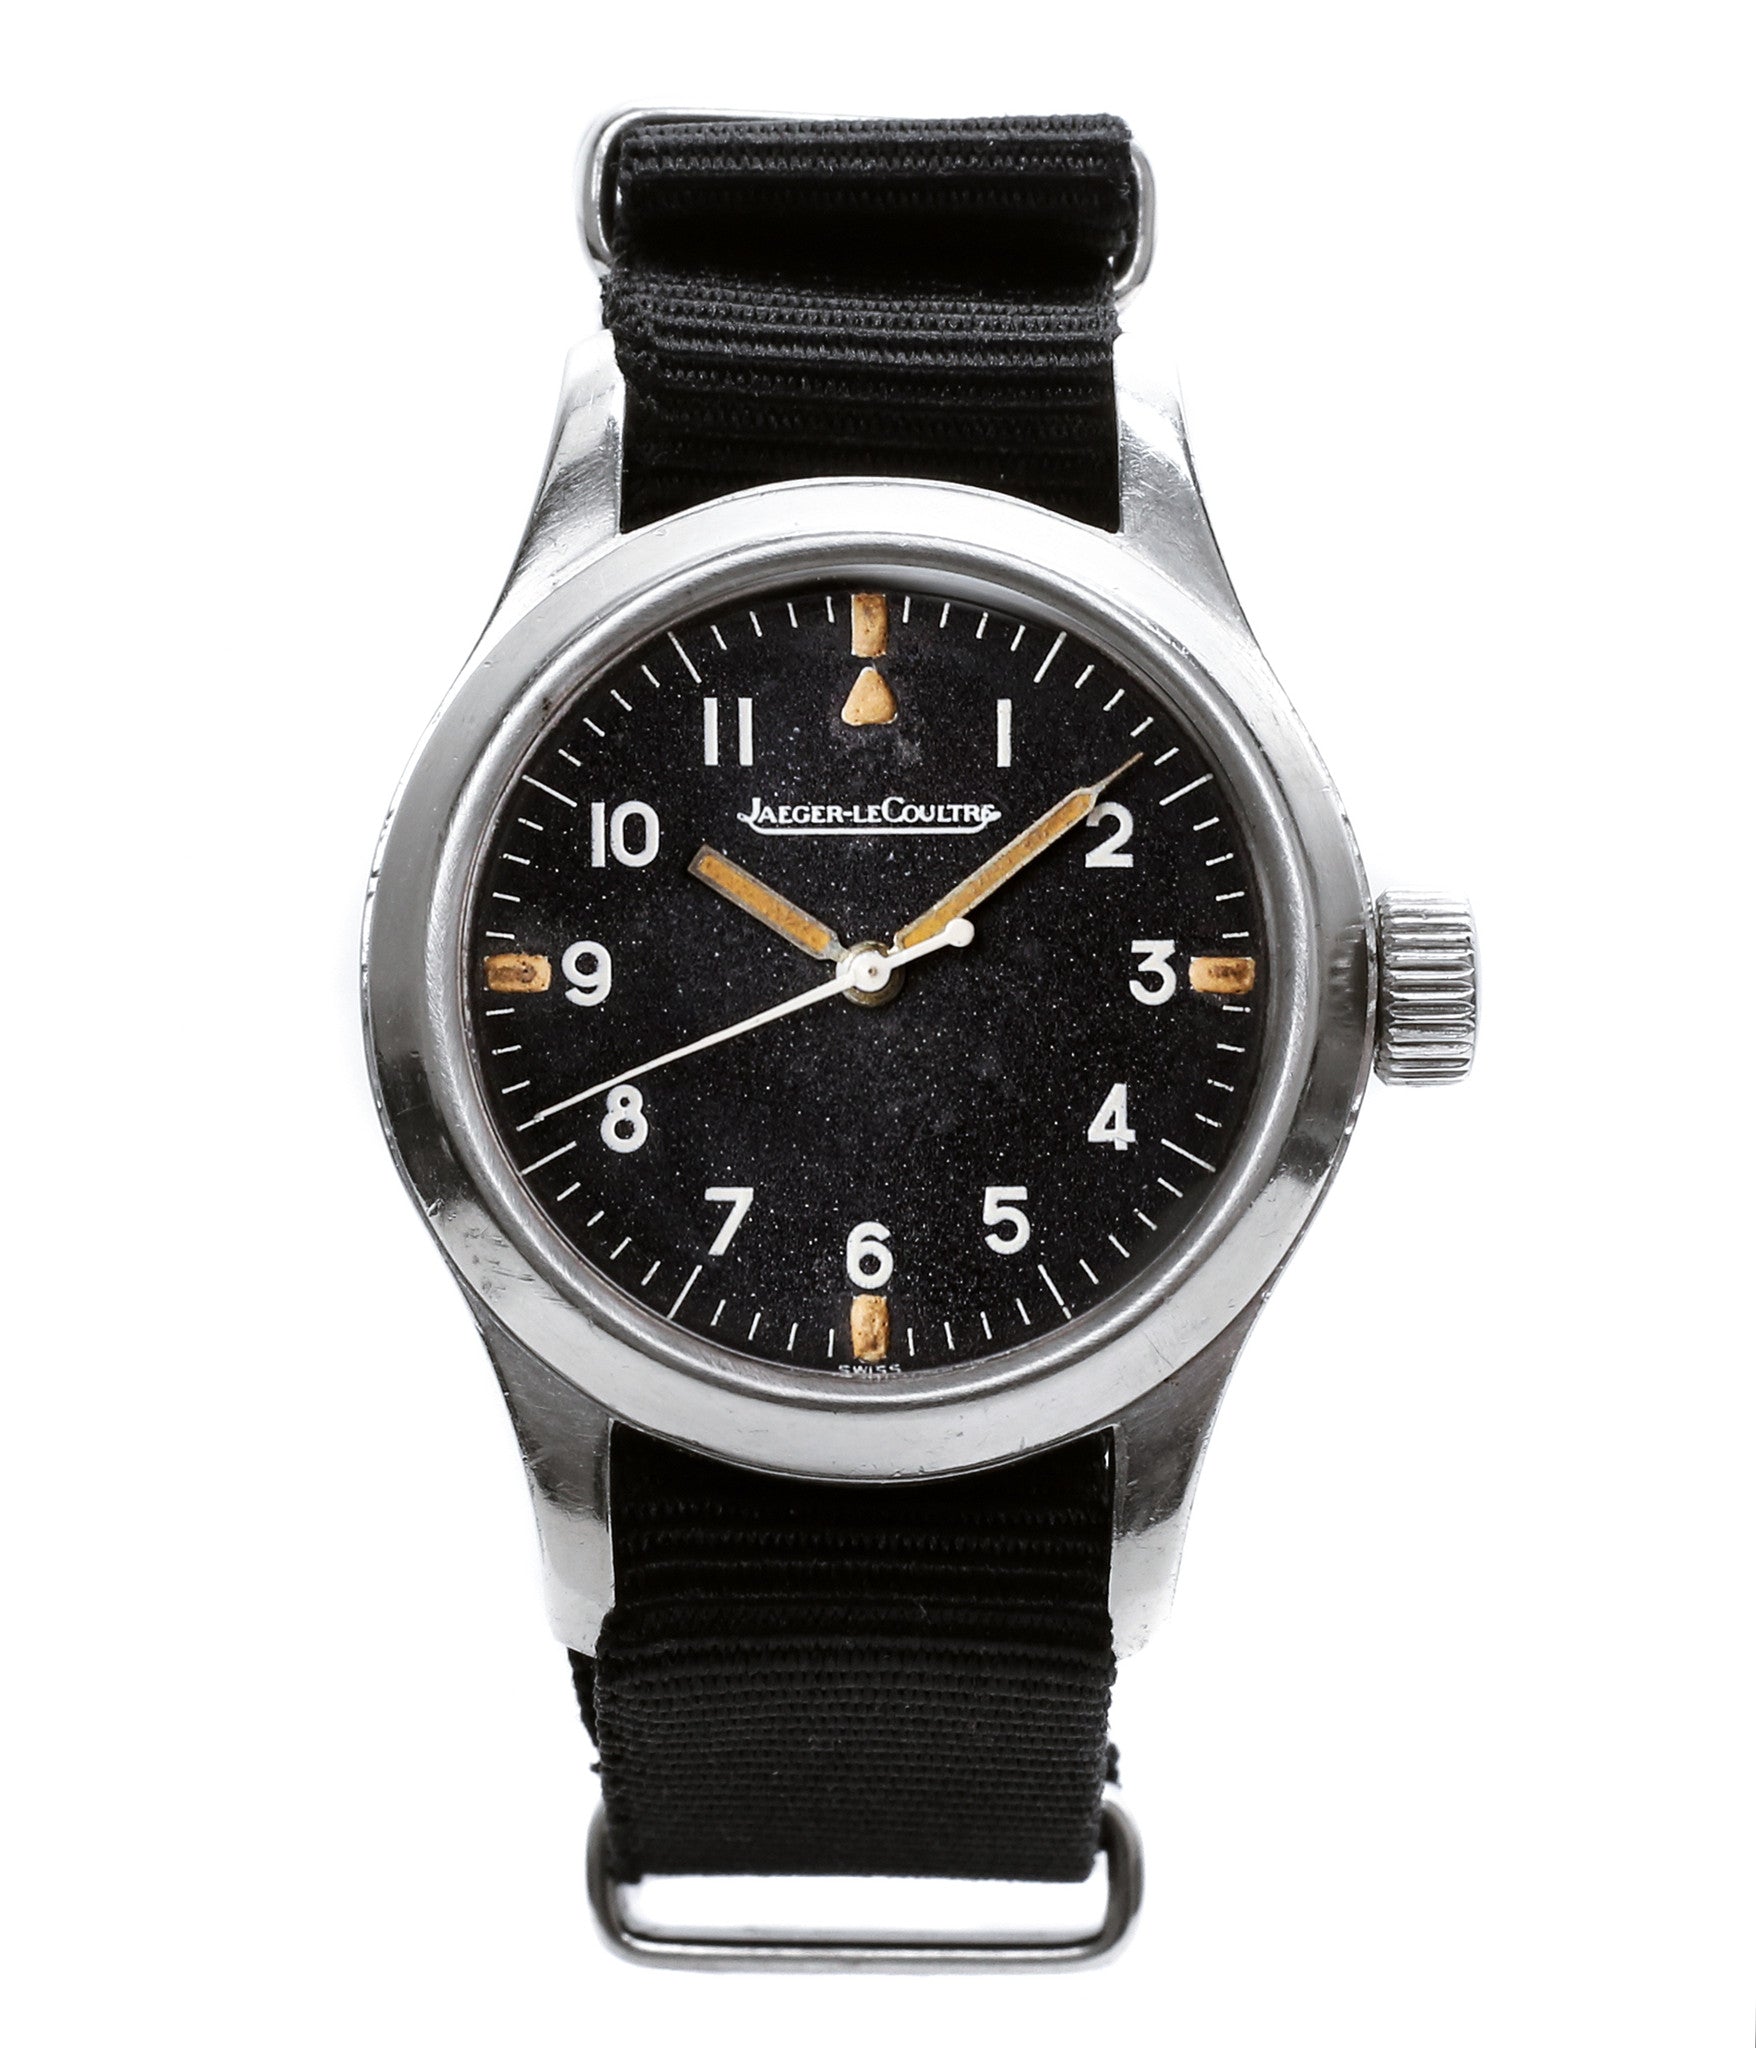 buy Jaeger-LeCoultre Mark 11 RAAF Australian Air Force vintage military pilot watch G6B/346 watch for sale online at A Collected Man London vintage military watch specialist